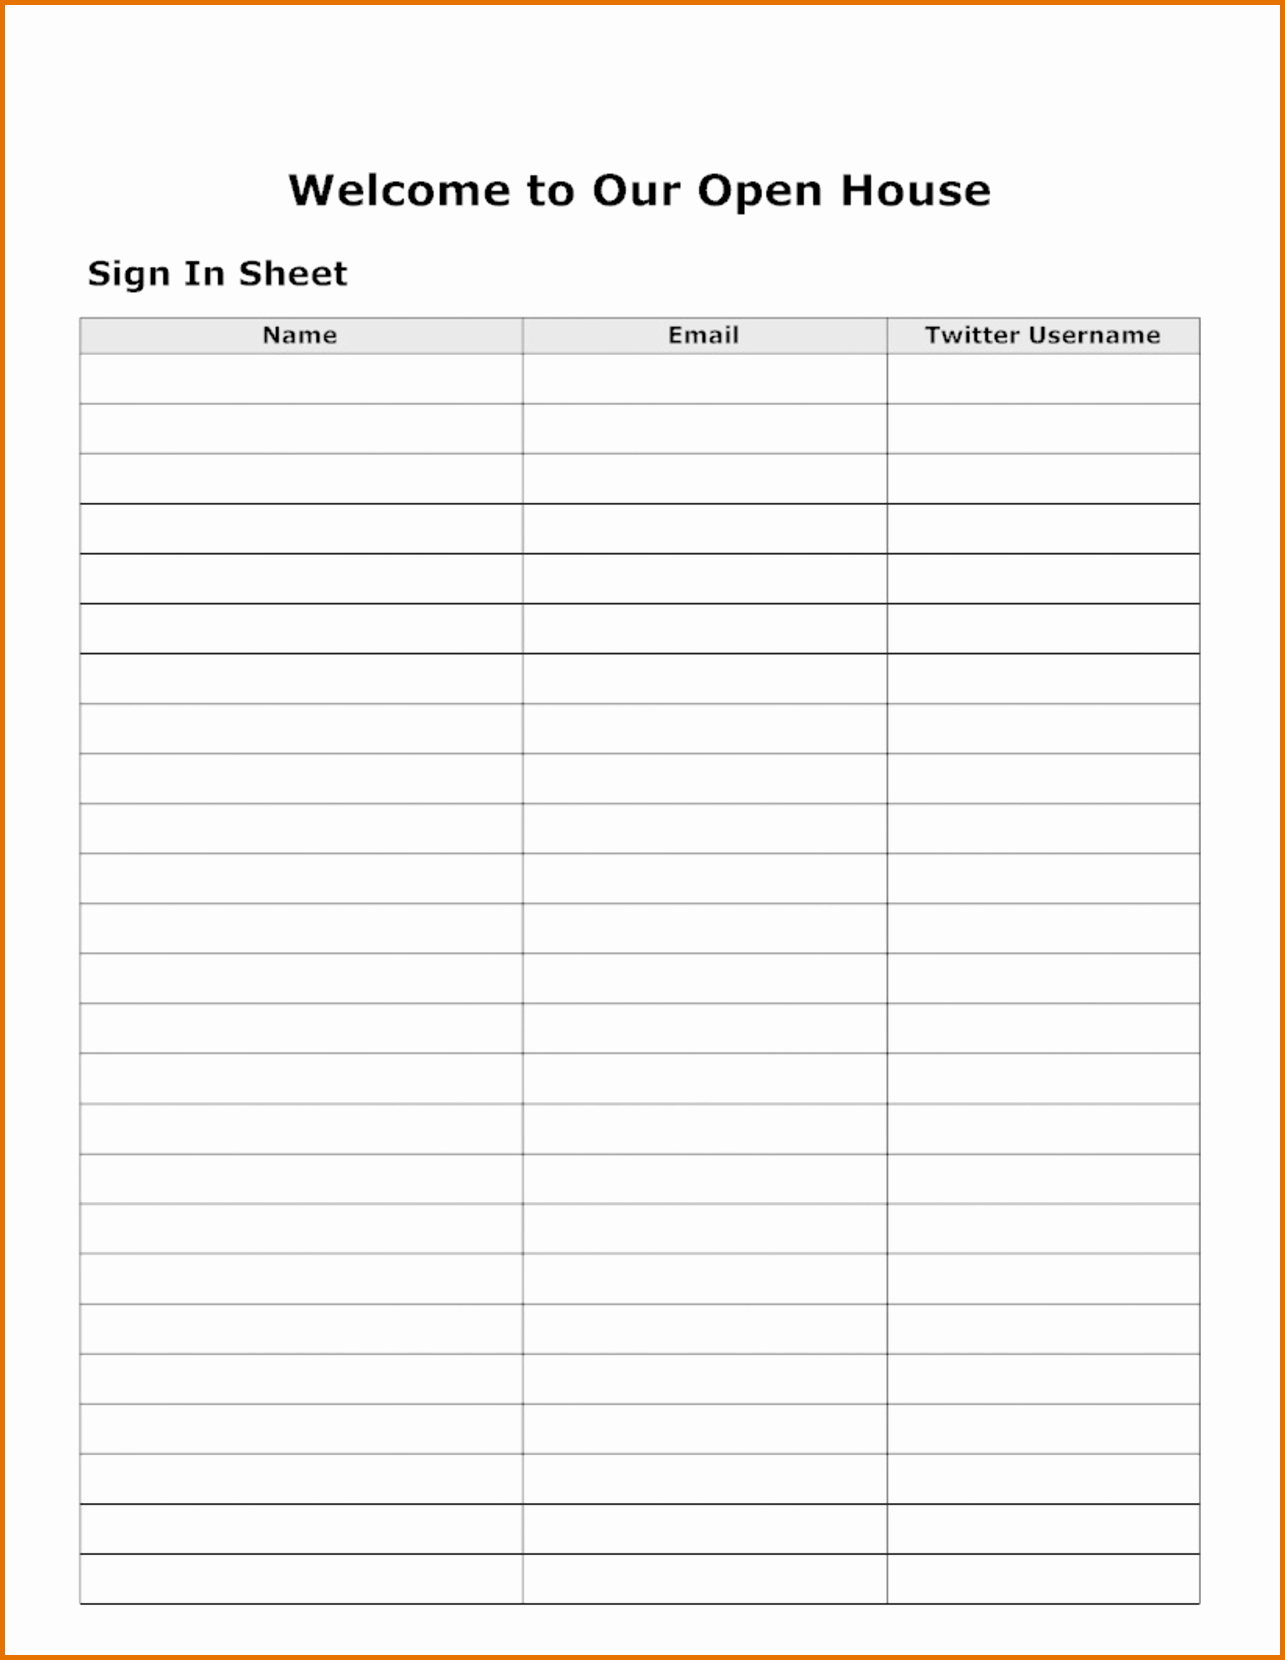 Email Sign In Sheet Template New 8 Open House Sign In Sheet Templatereference Letters